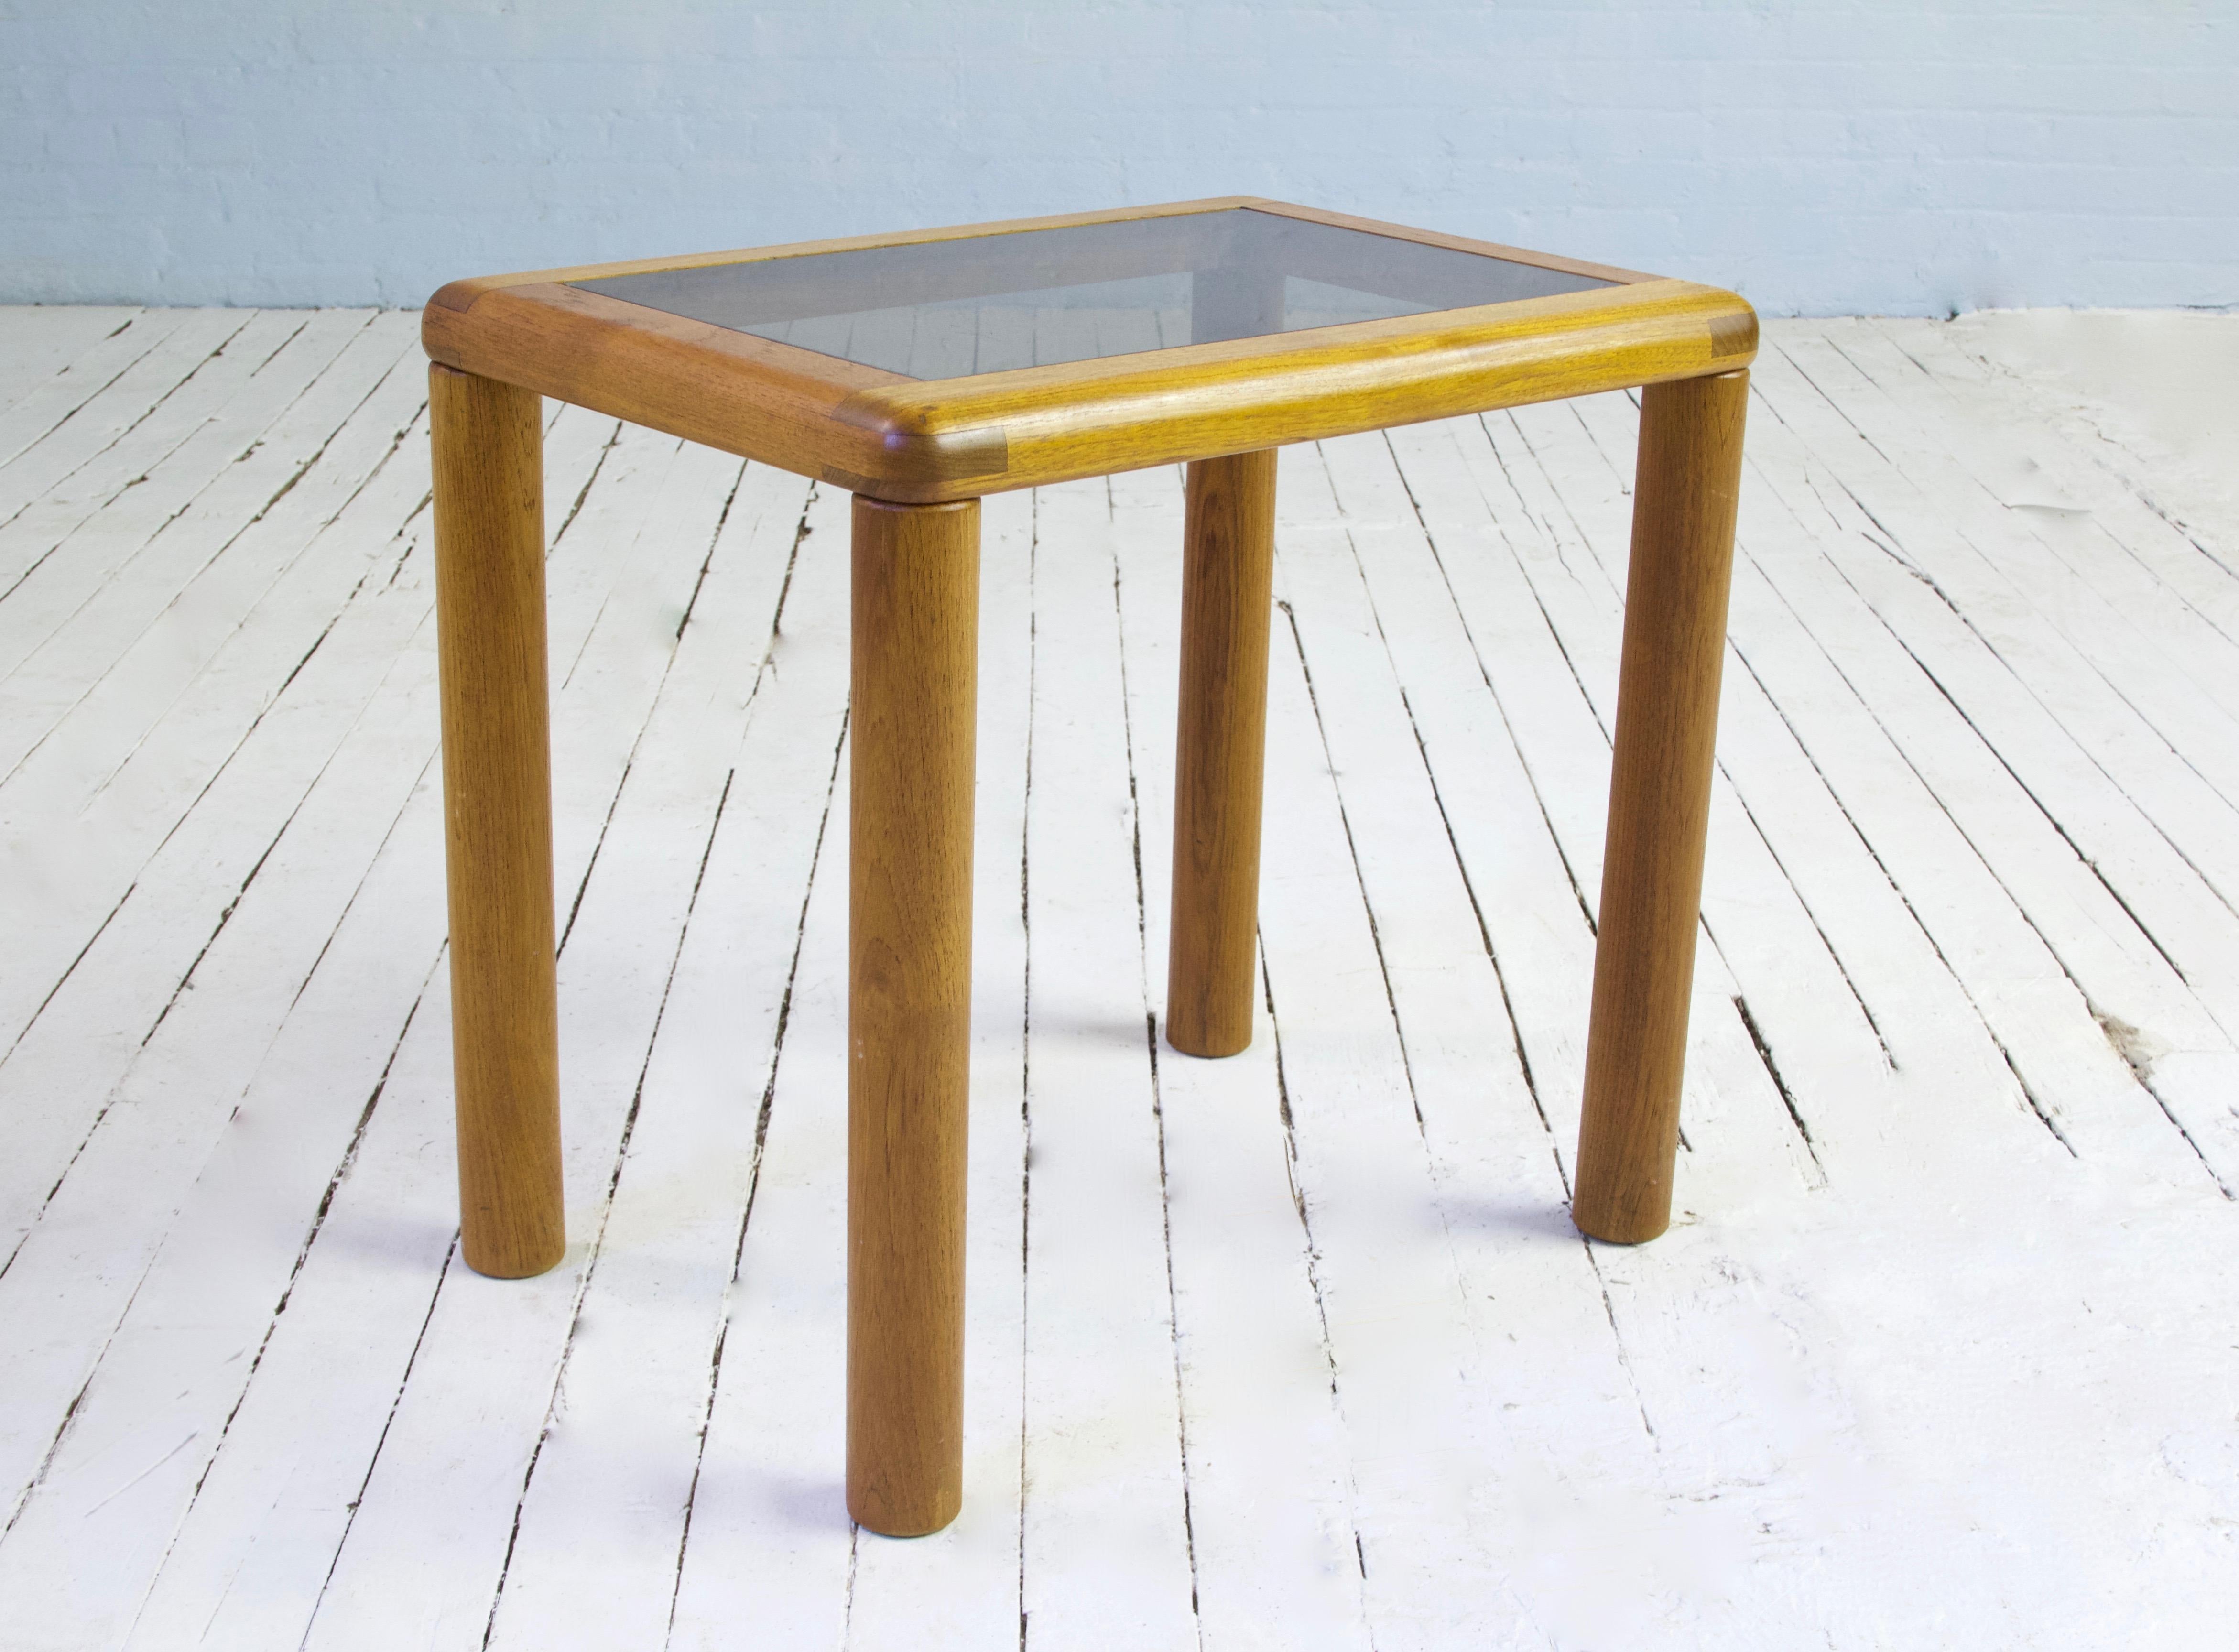 Oiled Vintage Danish Side Table in Teak with Turned Legs, 1960s For Sale